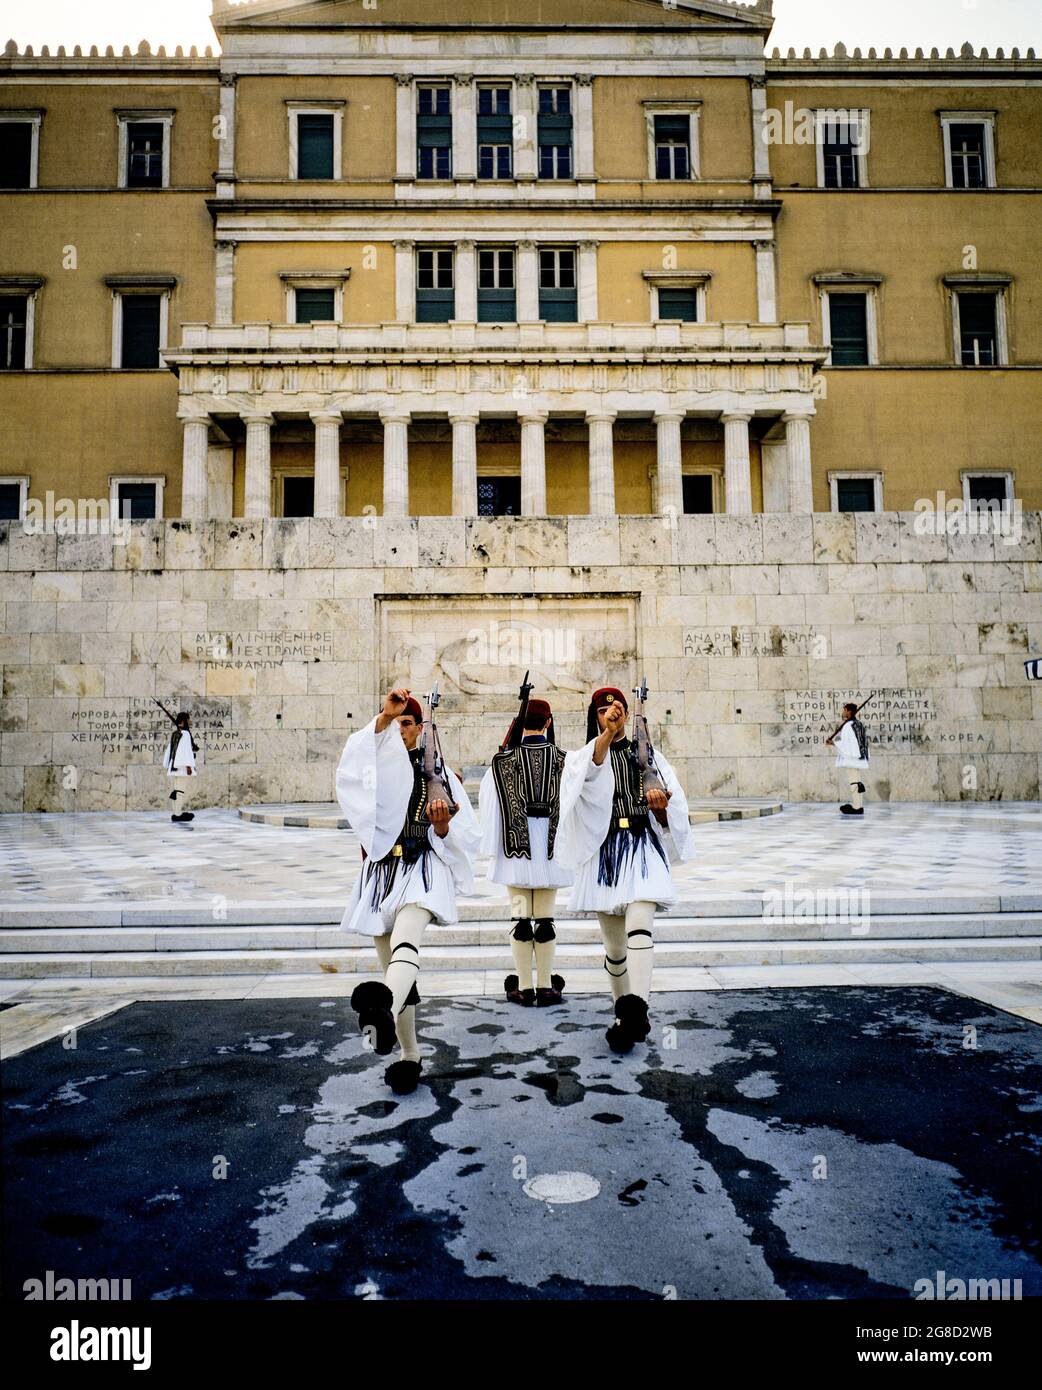 Athens, Evzones presidential guards mounting guard at the tomb of the unkown soldier monument, Vouli Greek Parliament building, Greece, Europe, Stock Photo